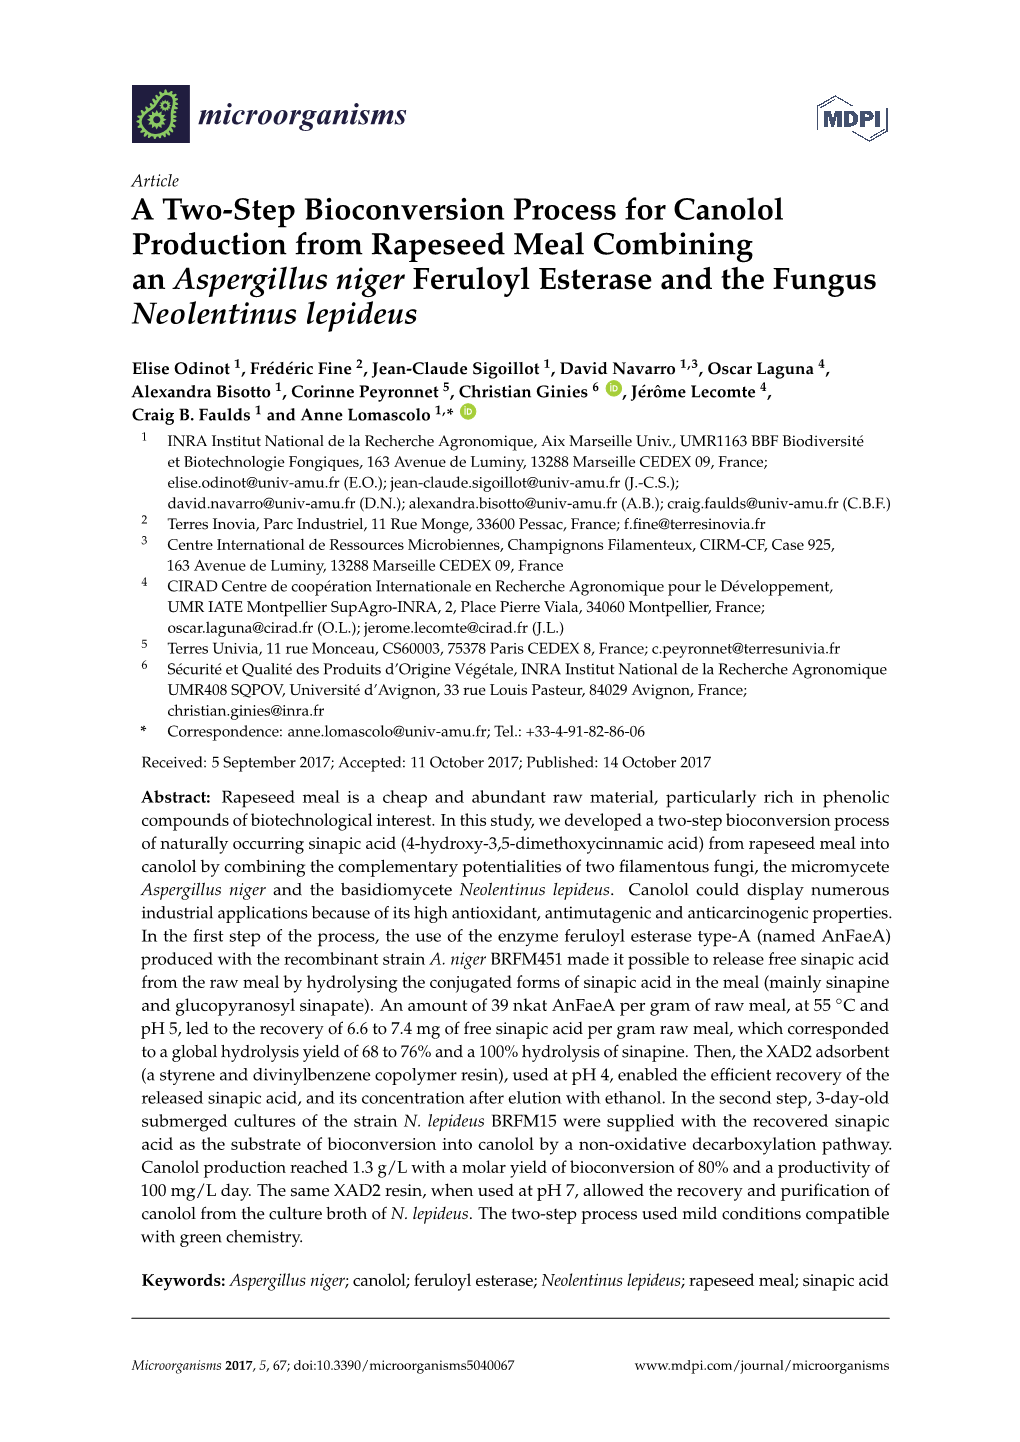 A Two-Step Bioconversion Process for Canolol Production from Rapeseed Meal Combining an Aspergillus Niger Feruloyl Esterase and the Fungus Neolentinus Lepideus